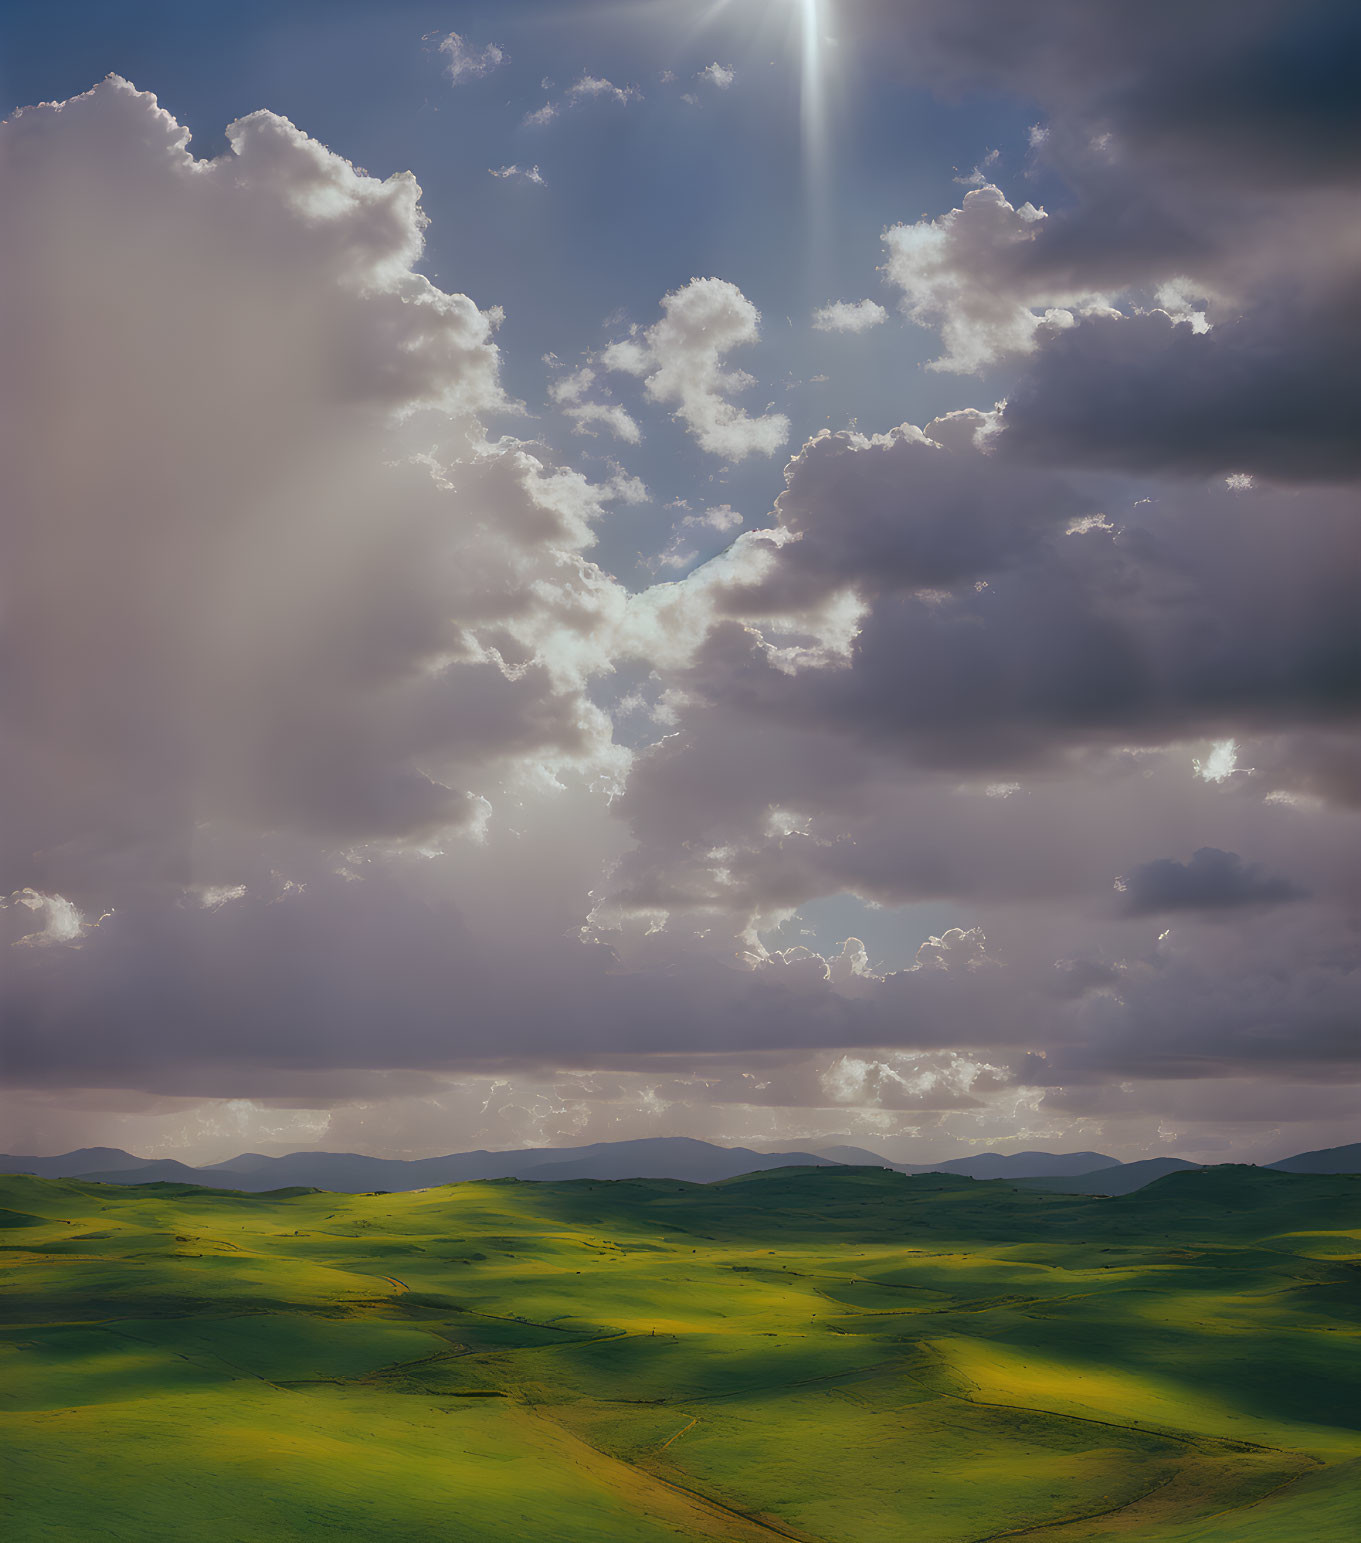 Dramatic sky over rolling green hills with sunbeams